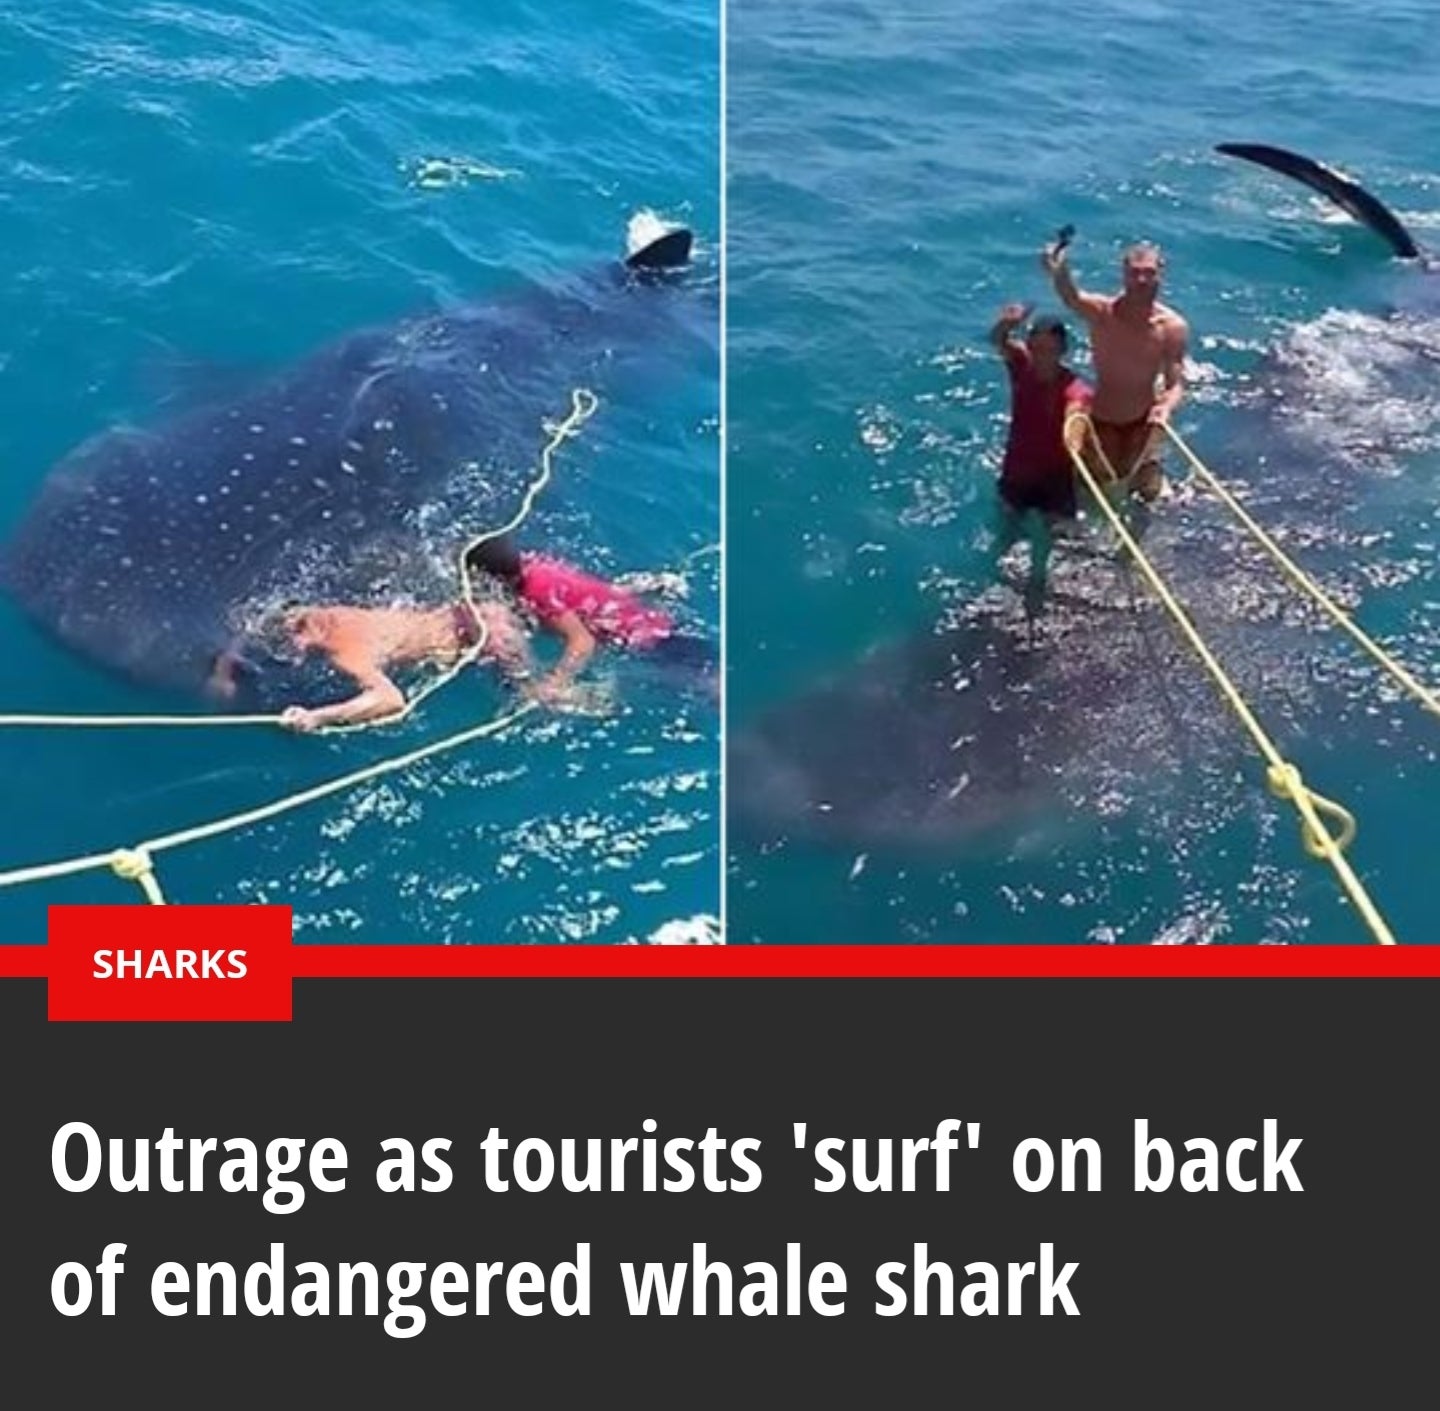 water - Sharks Outrage as tourists surf on back of endangered whale shark